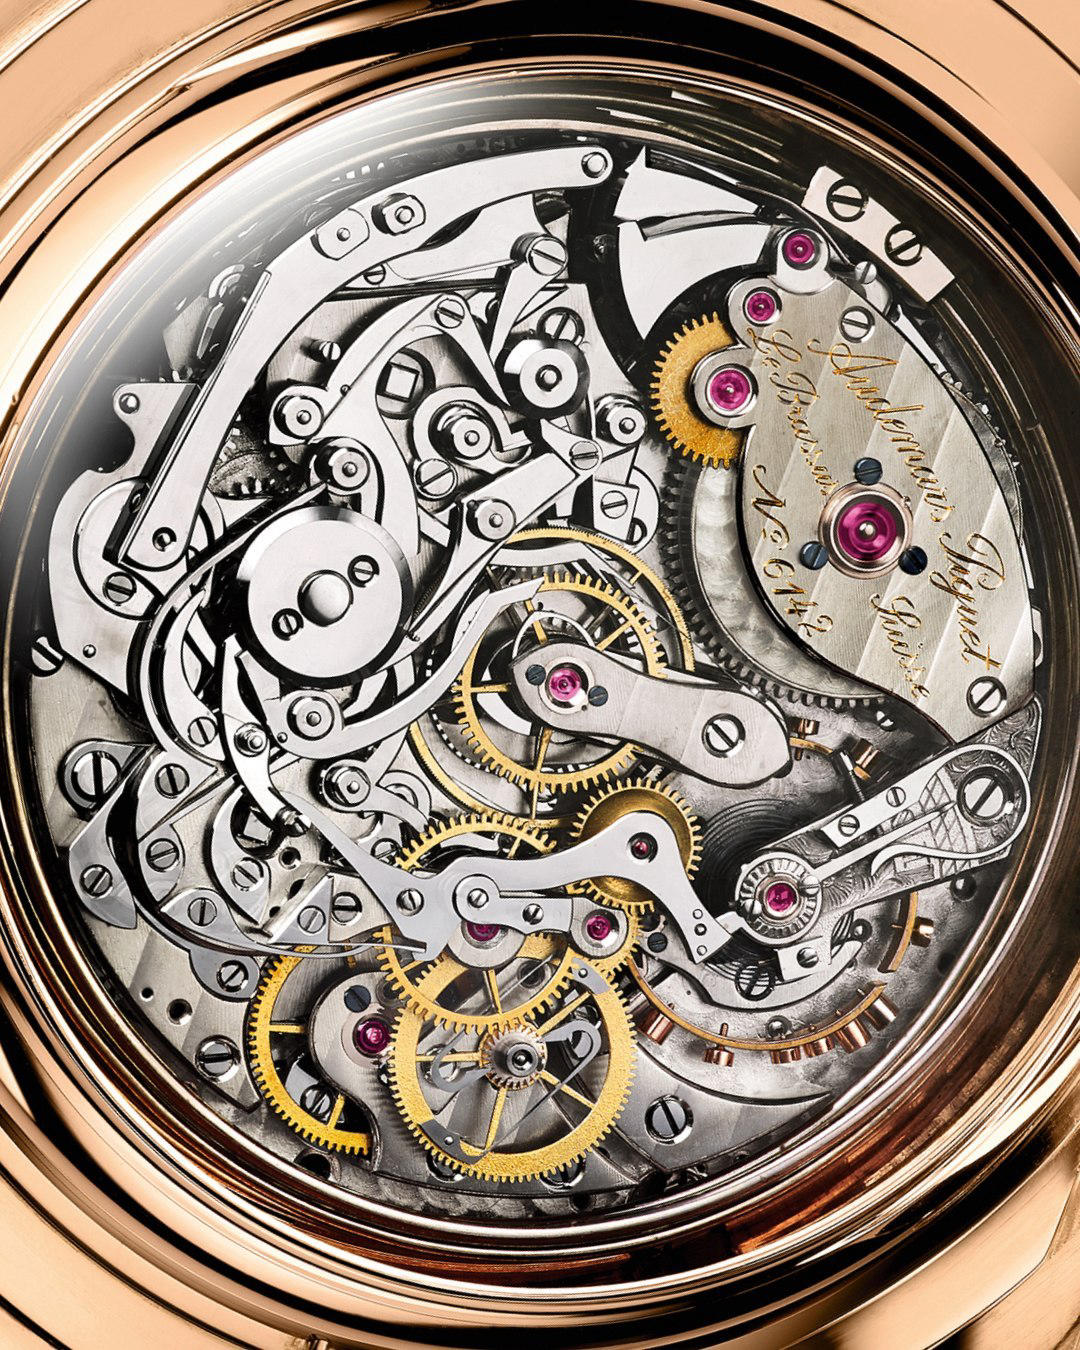 A fine feat of watchmaking savoir-faire